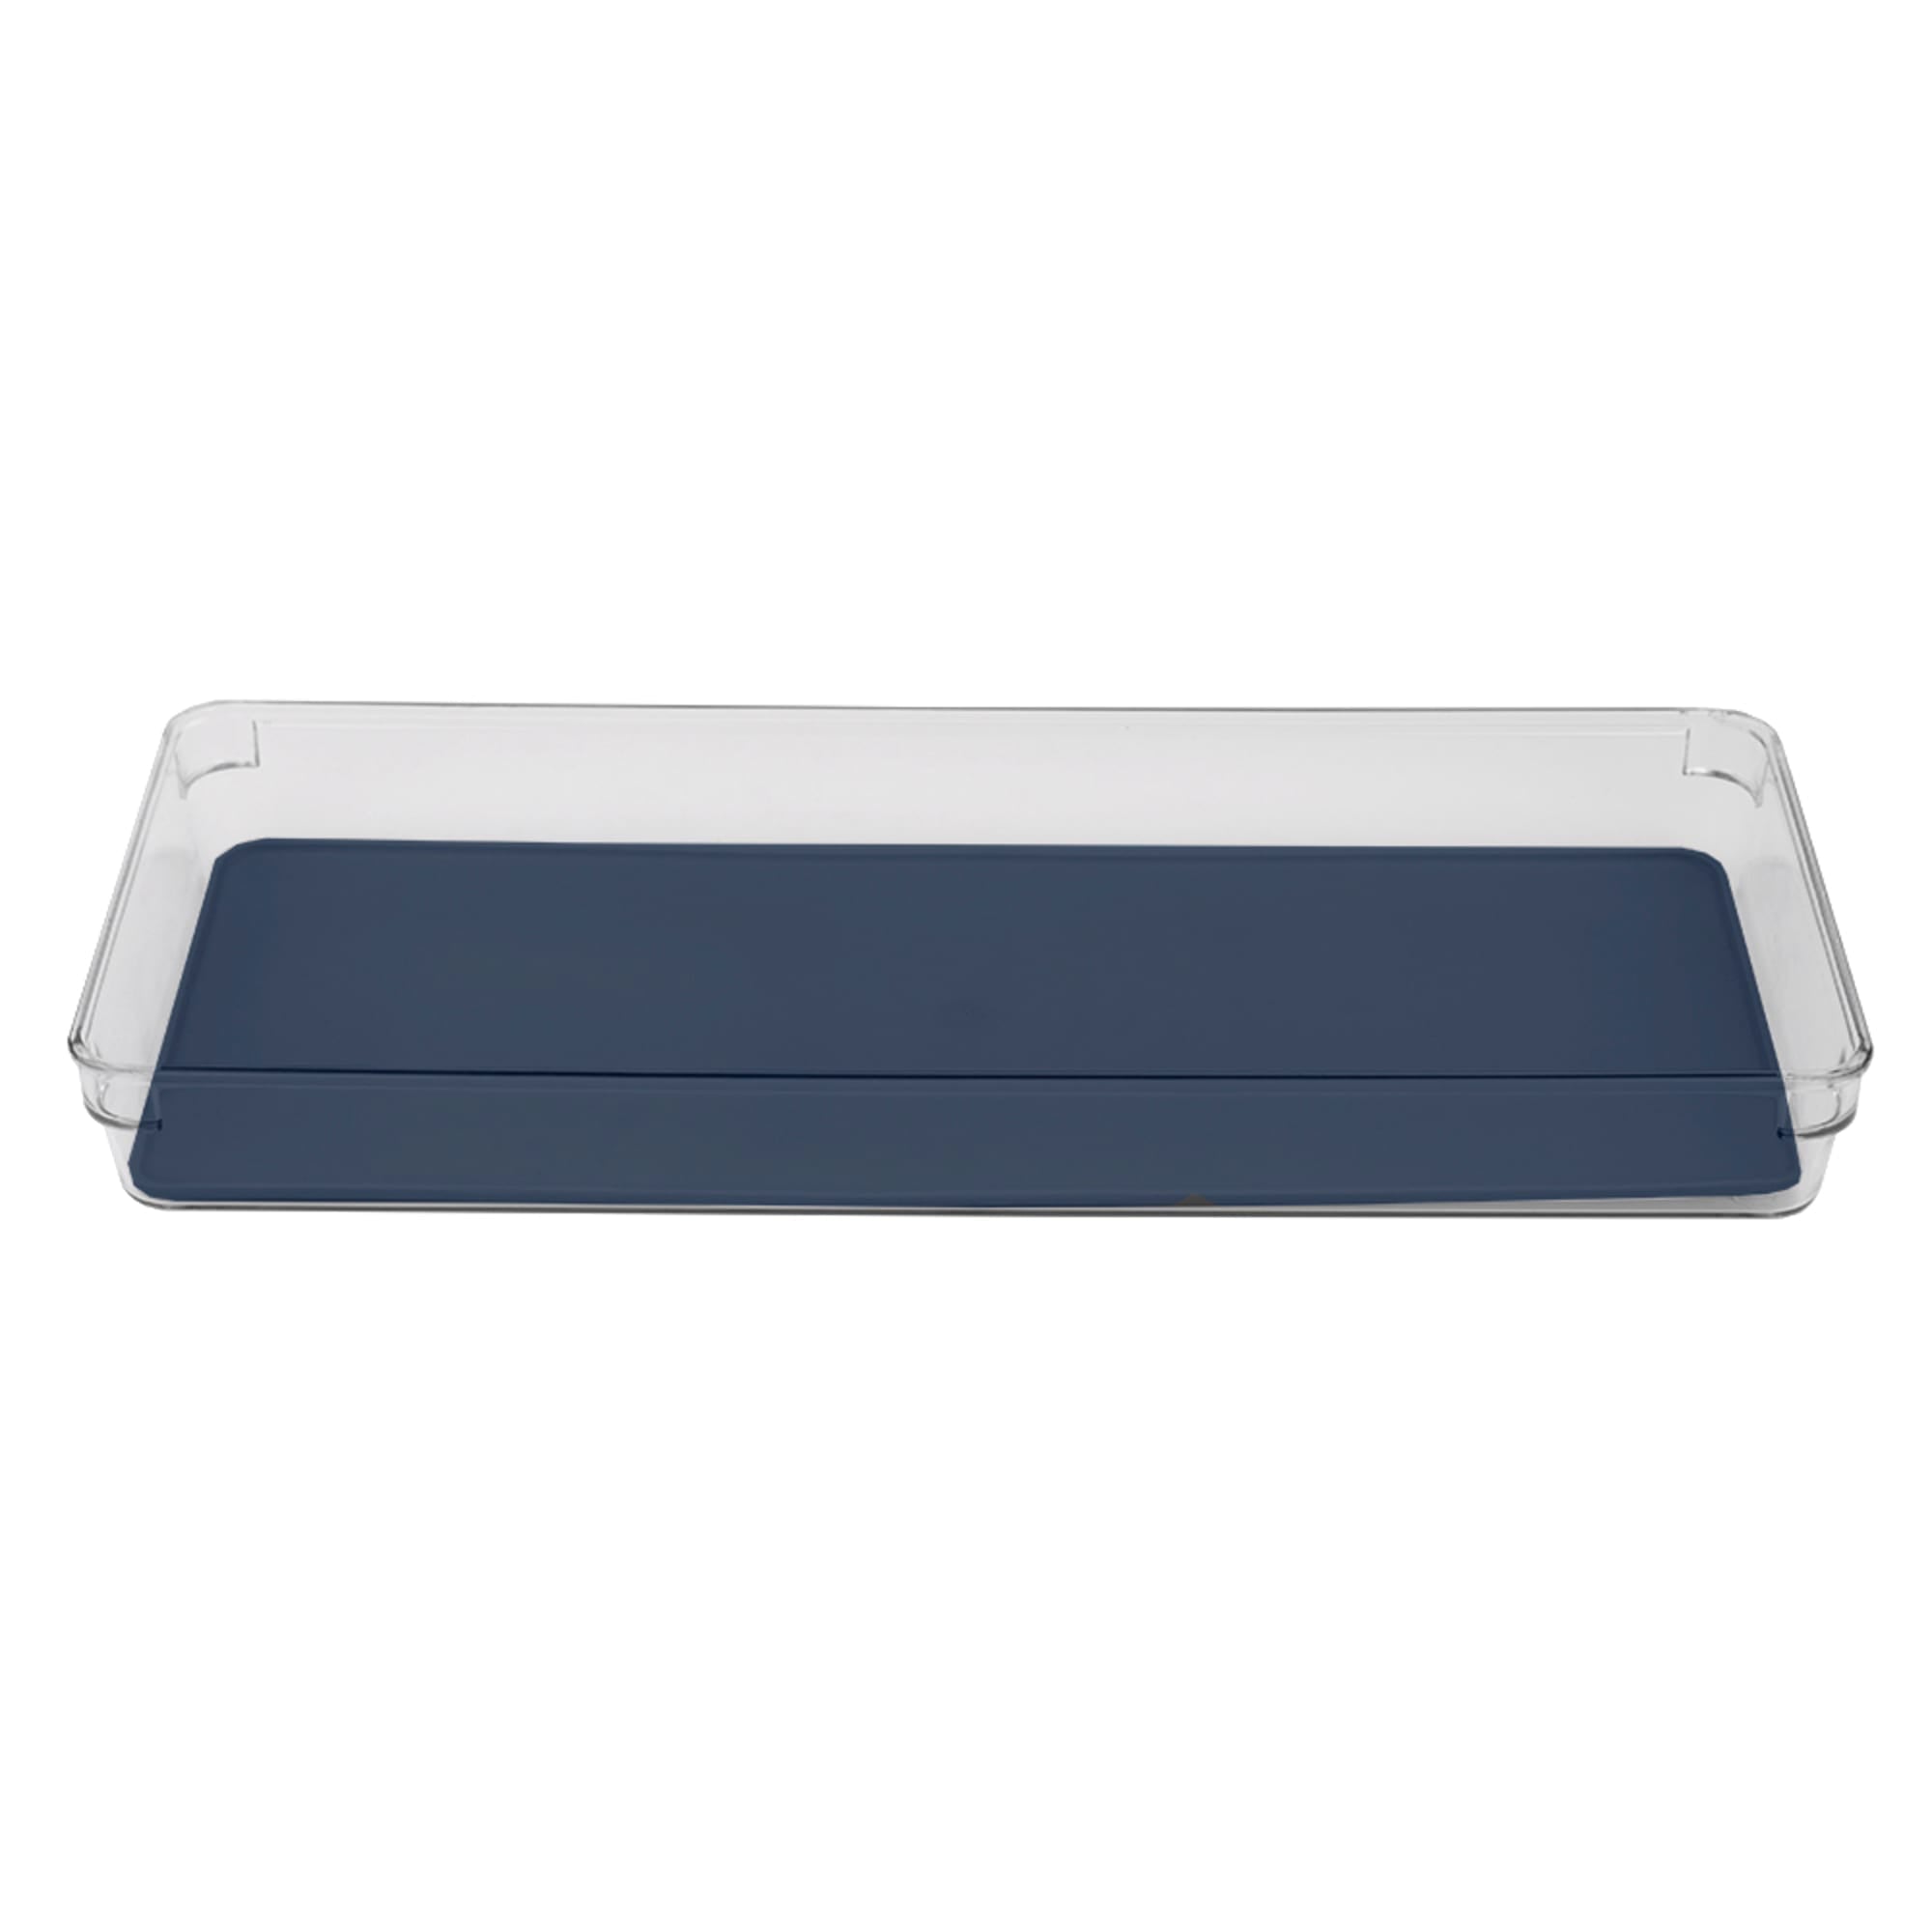 Michael Graves Design 16" x 6" Drawer Organizer with Indigo Rubber Lining $4.00 EACH, CASE PACK OF 24